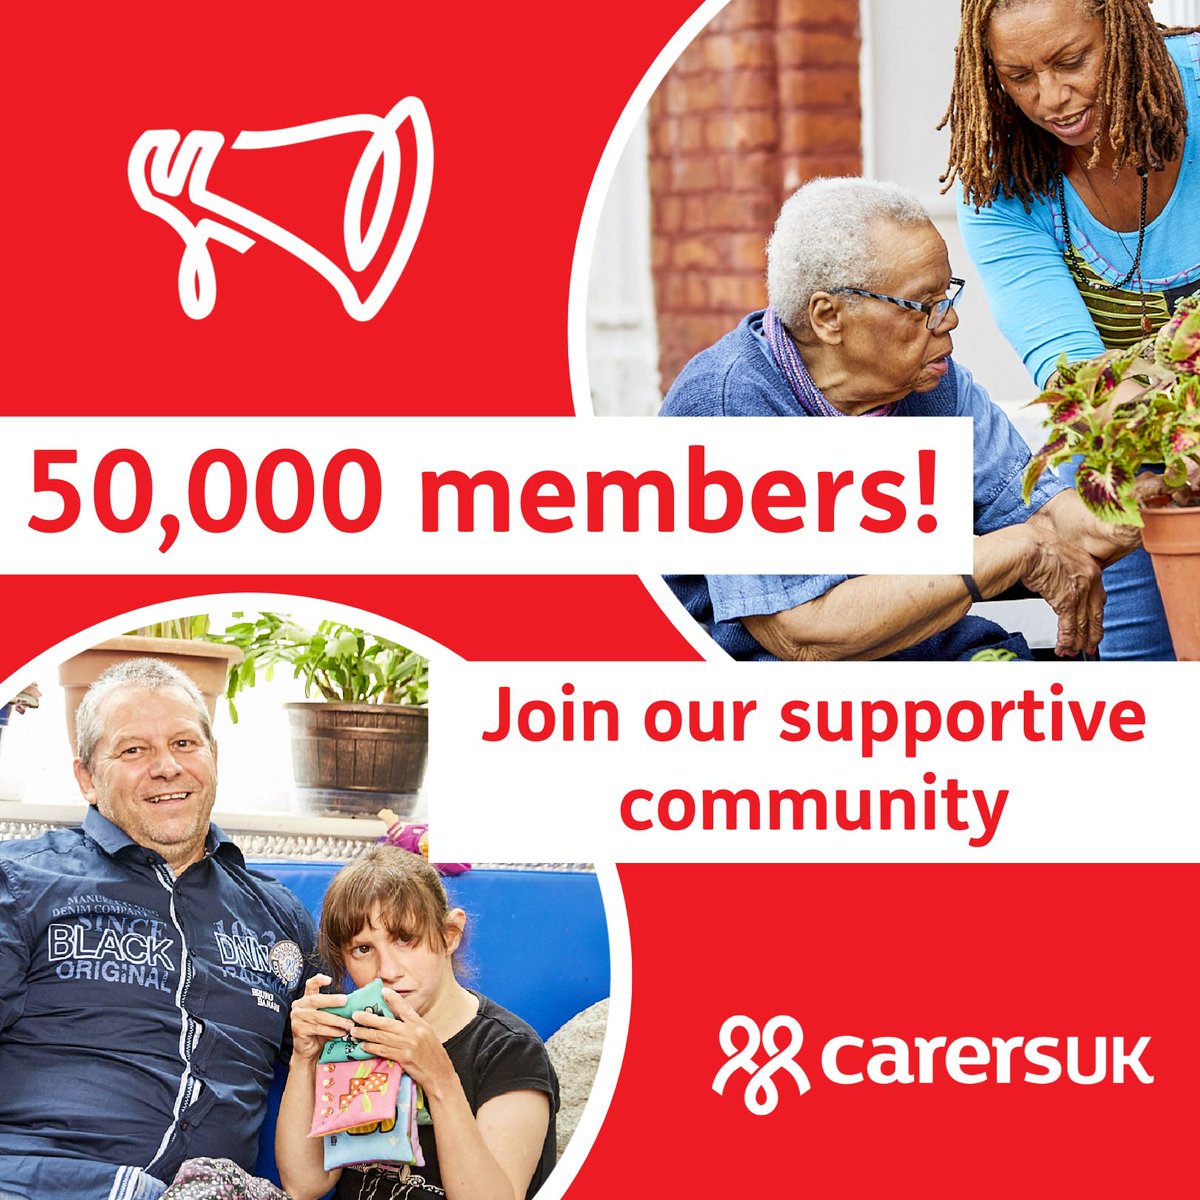 For the first time in our history we have reached a huge milestone of 50,000 members! Thanks to everyone who has joined and created a supportive community and movement for change. If you or anyone you know has caring responsibilities find out more here:go.carersuk.org/3vTQjMA?utm_so… ❤️